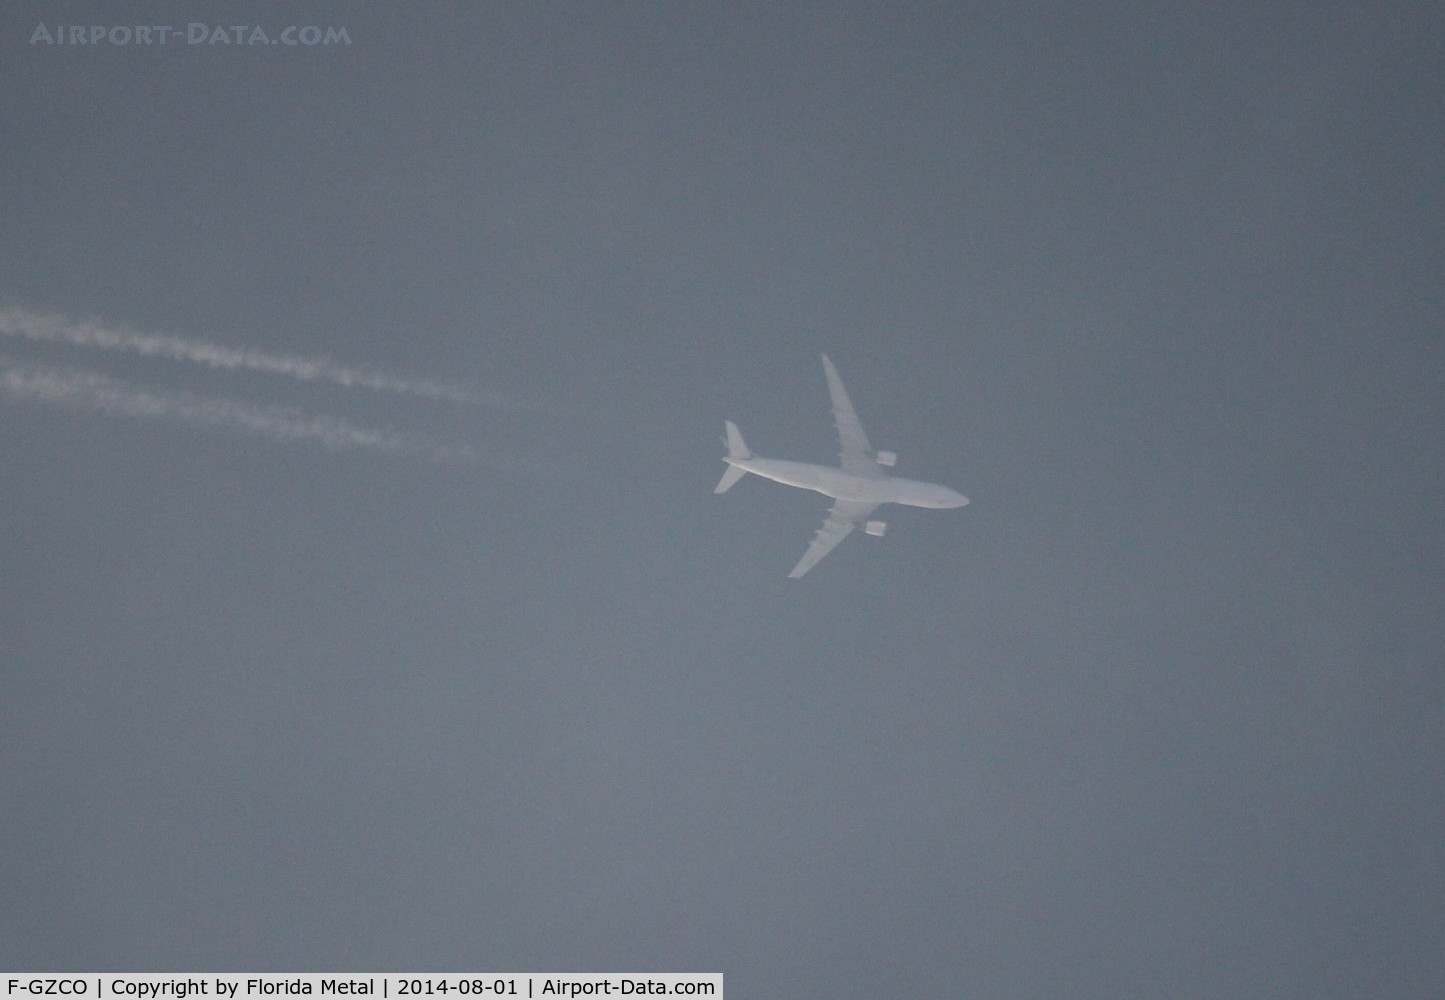 F-GZCO, 2006 Airbus A330-203 C/N 657, Air France A330-200 flying 35,000 ft over Livonia Michigan ORD-CDG info from flightradar24